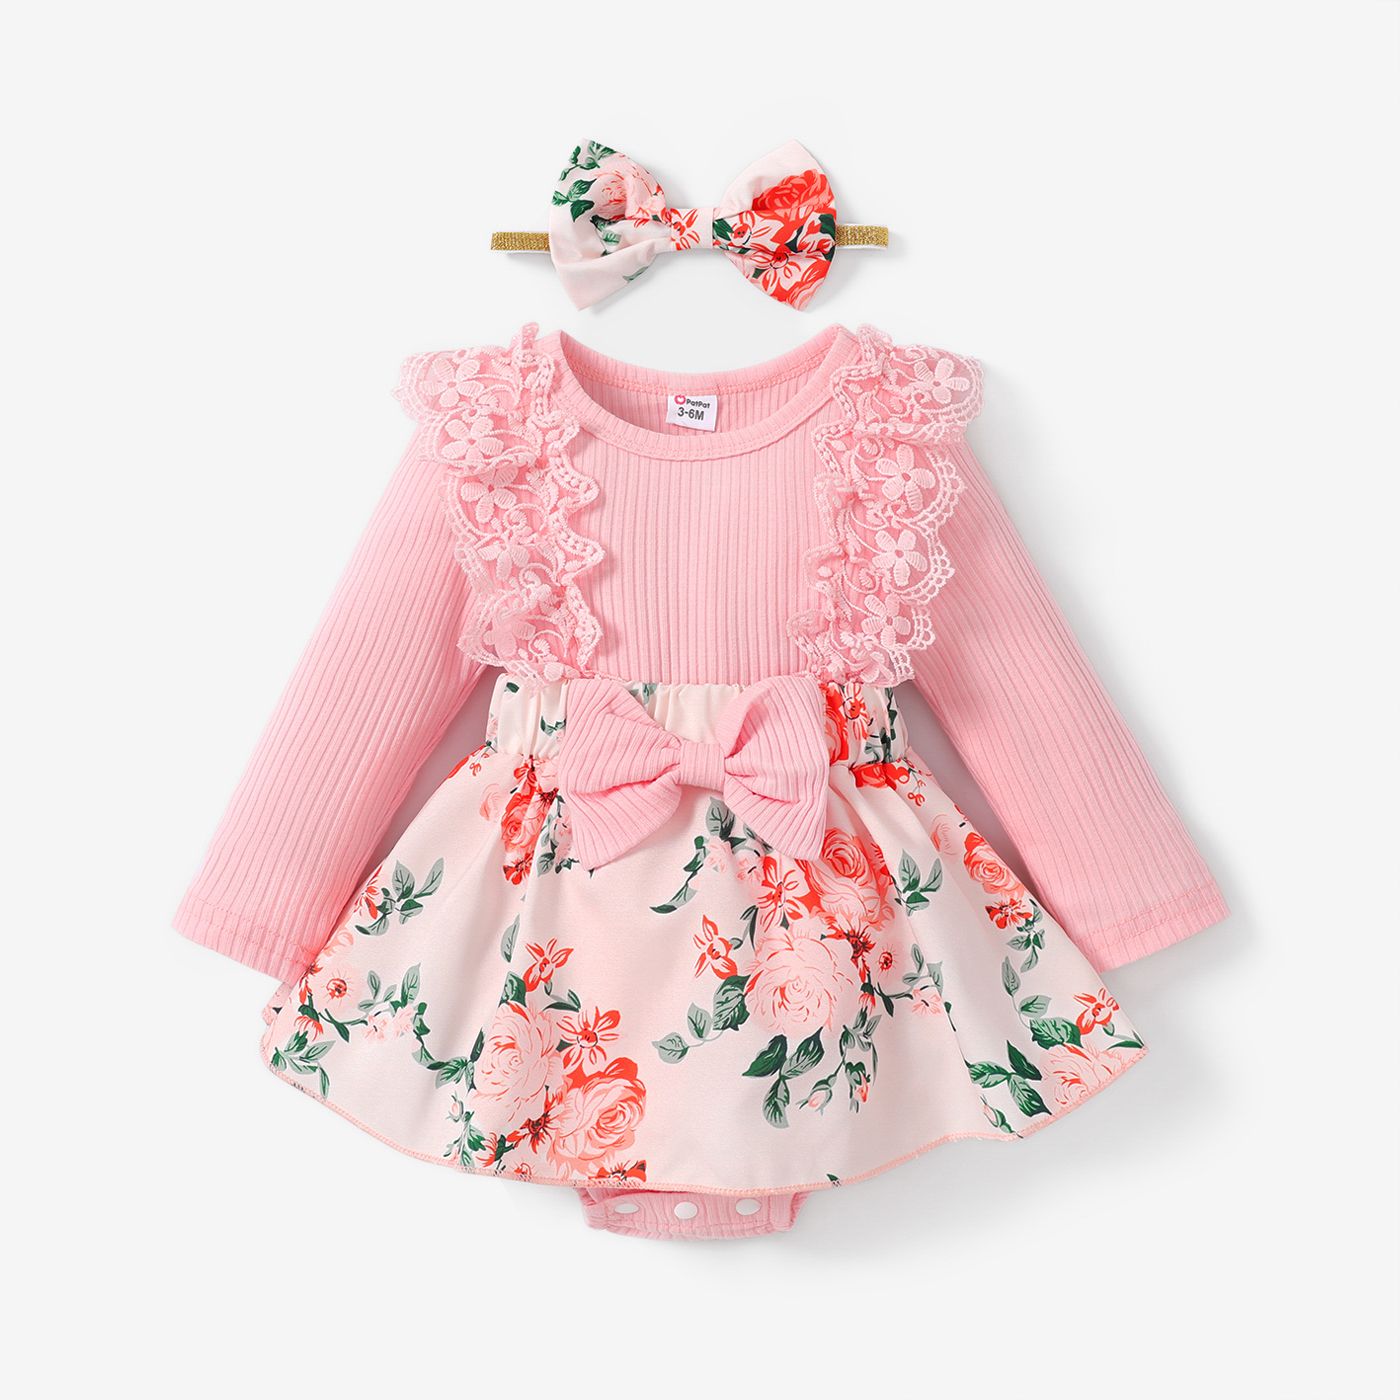 2pcs Baby Girl Long-sleeve Rib Knit Spliced Lace Ruffle Bow Front Floral Print Romper with Headband 